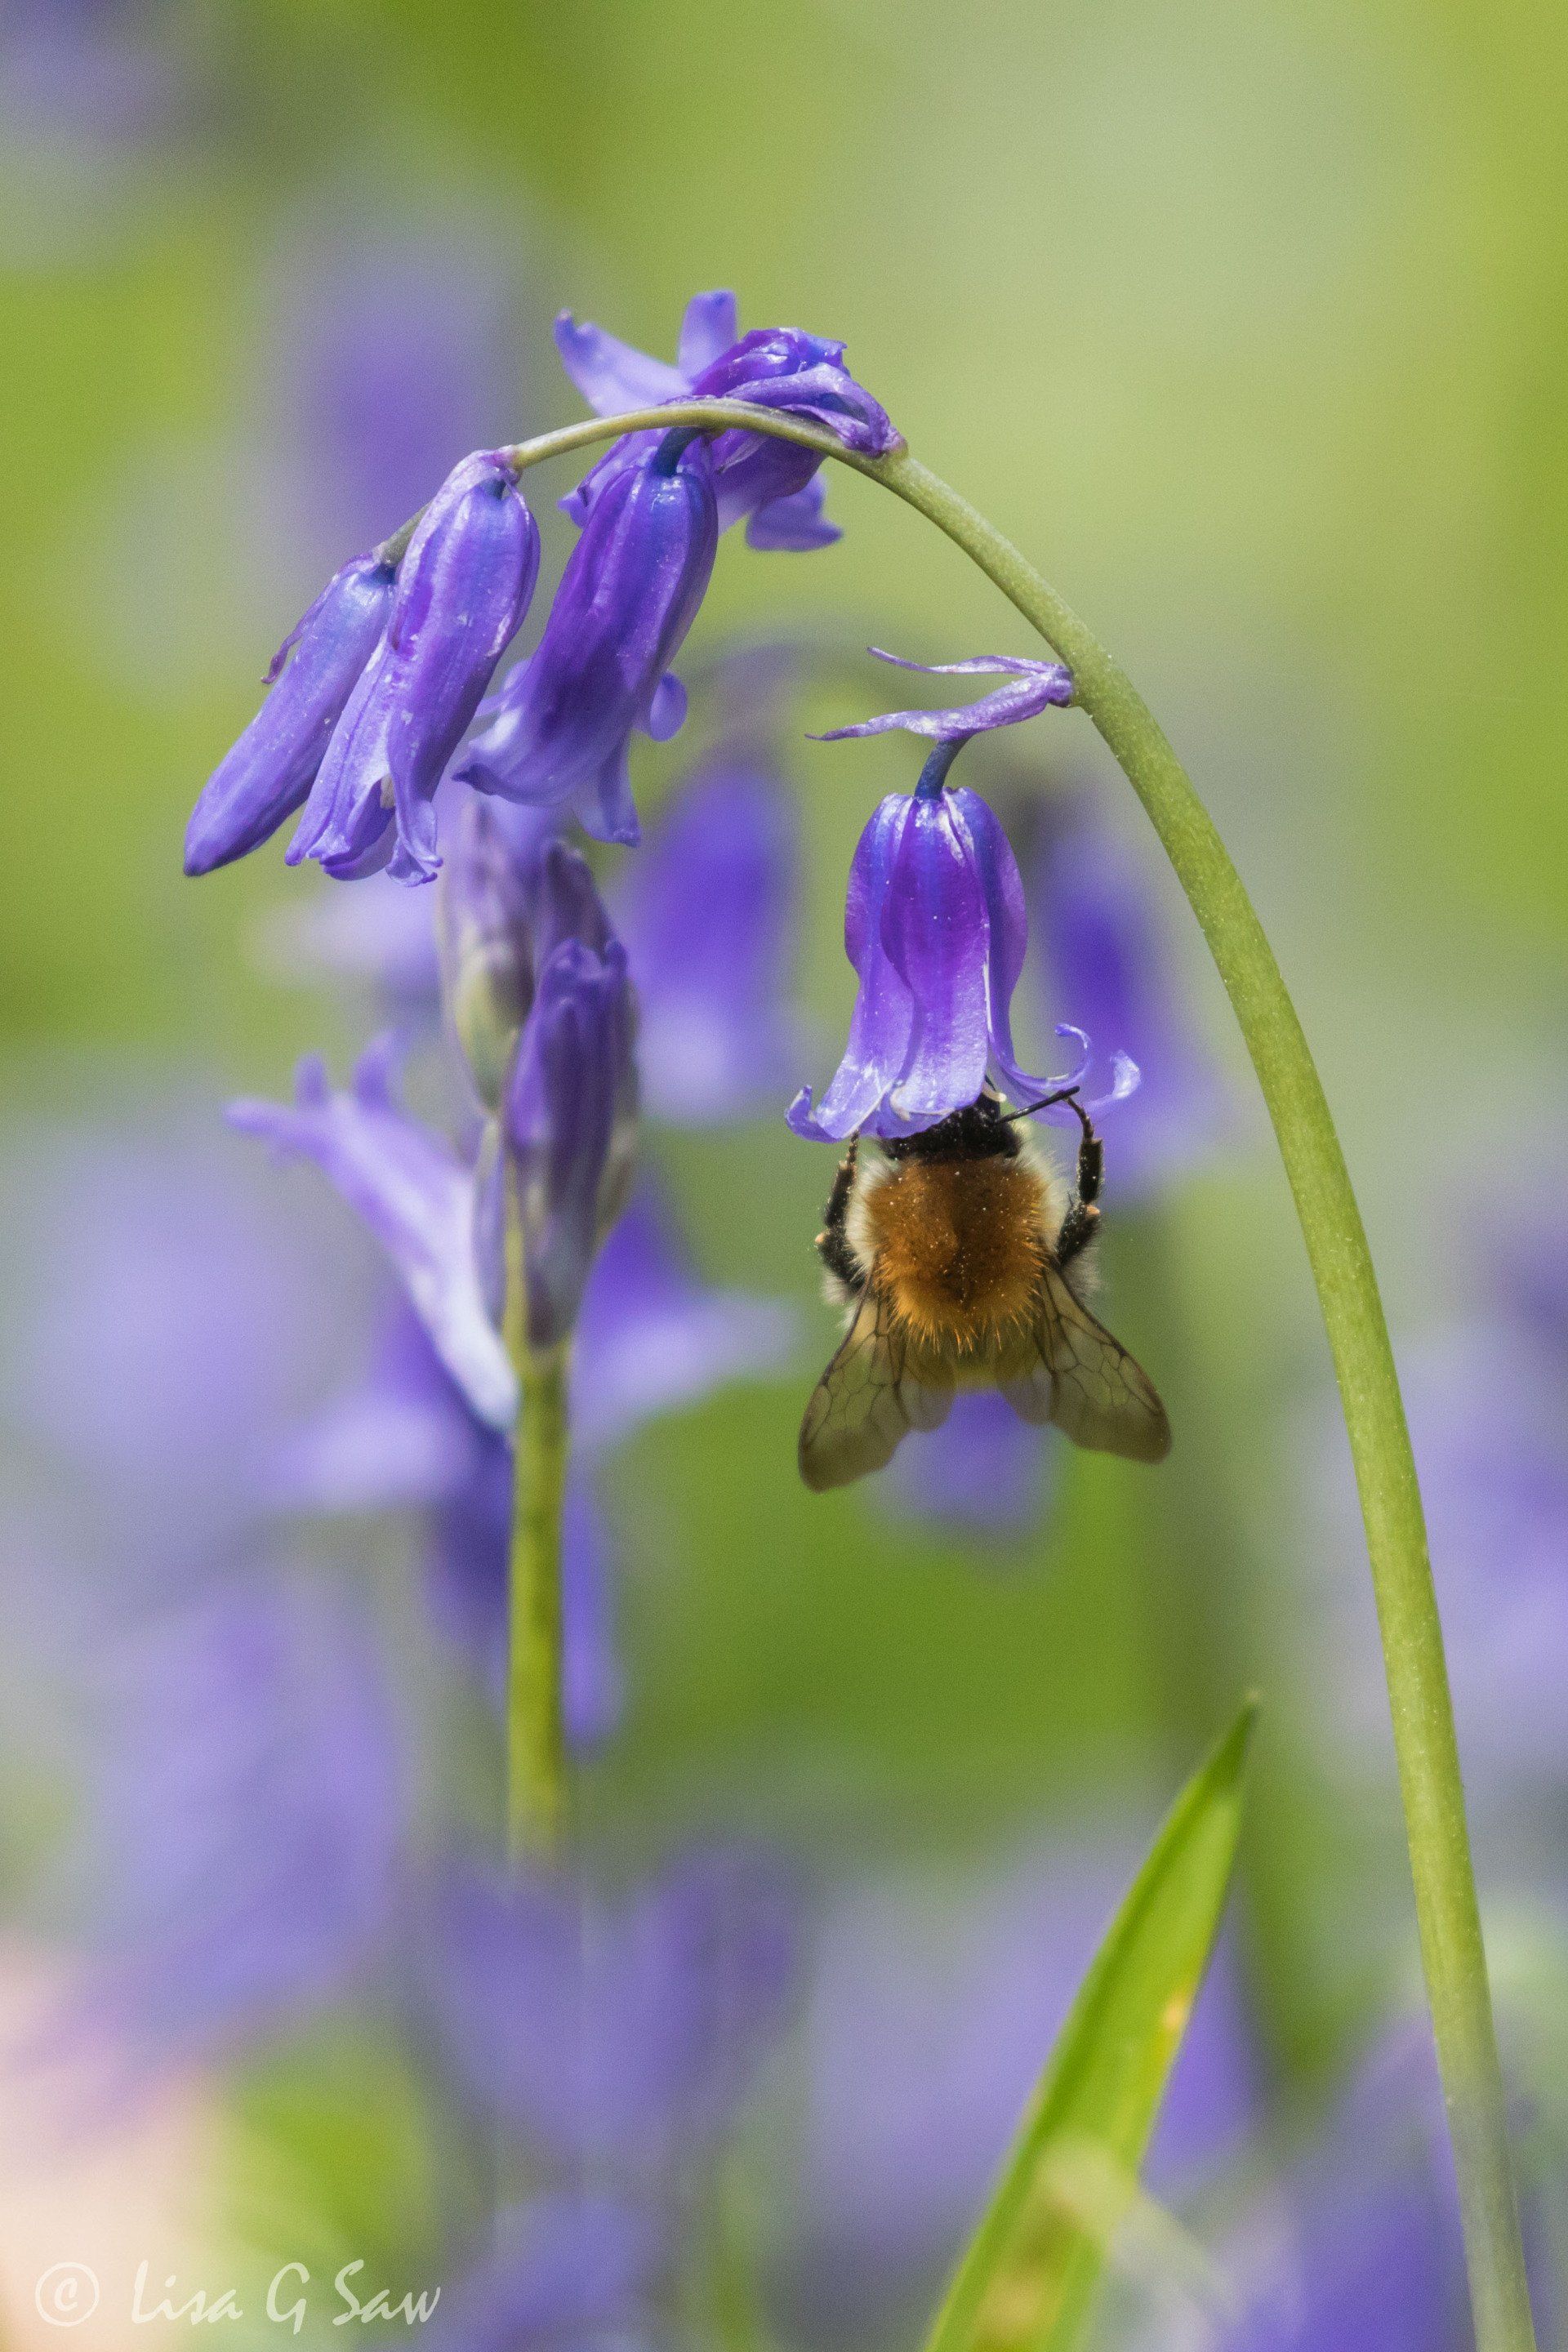 Bumble Bee feeding on bluebell